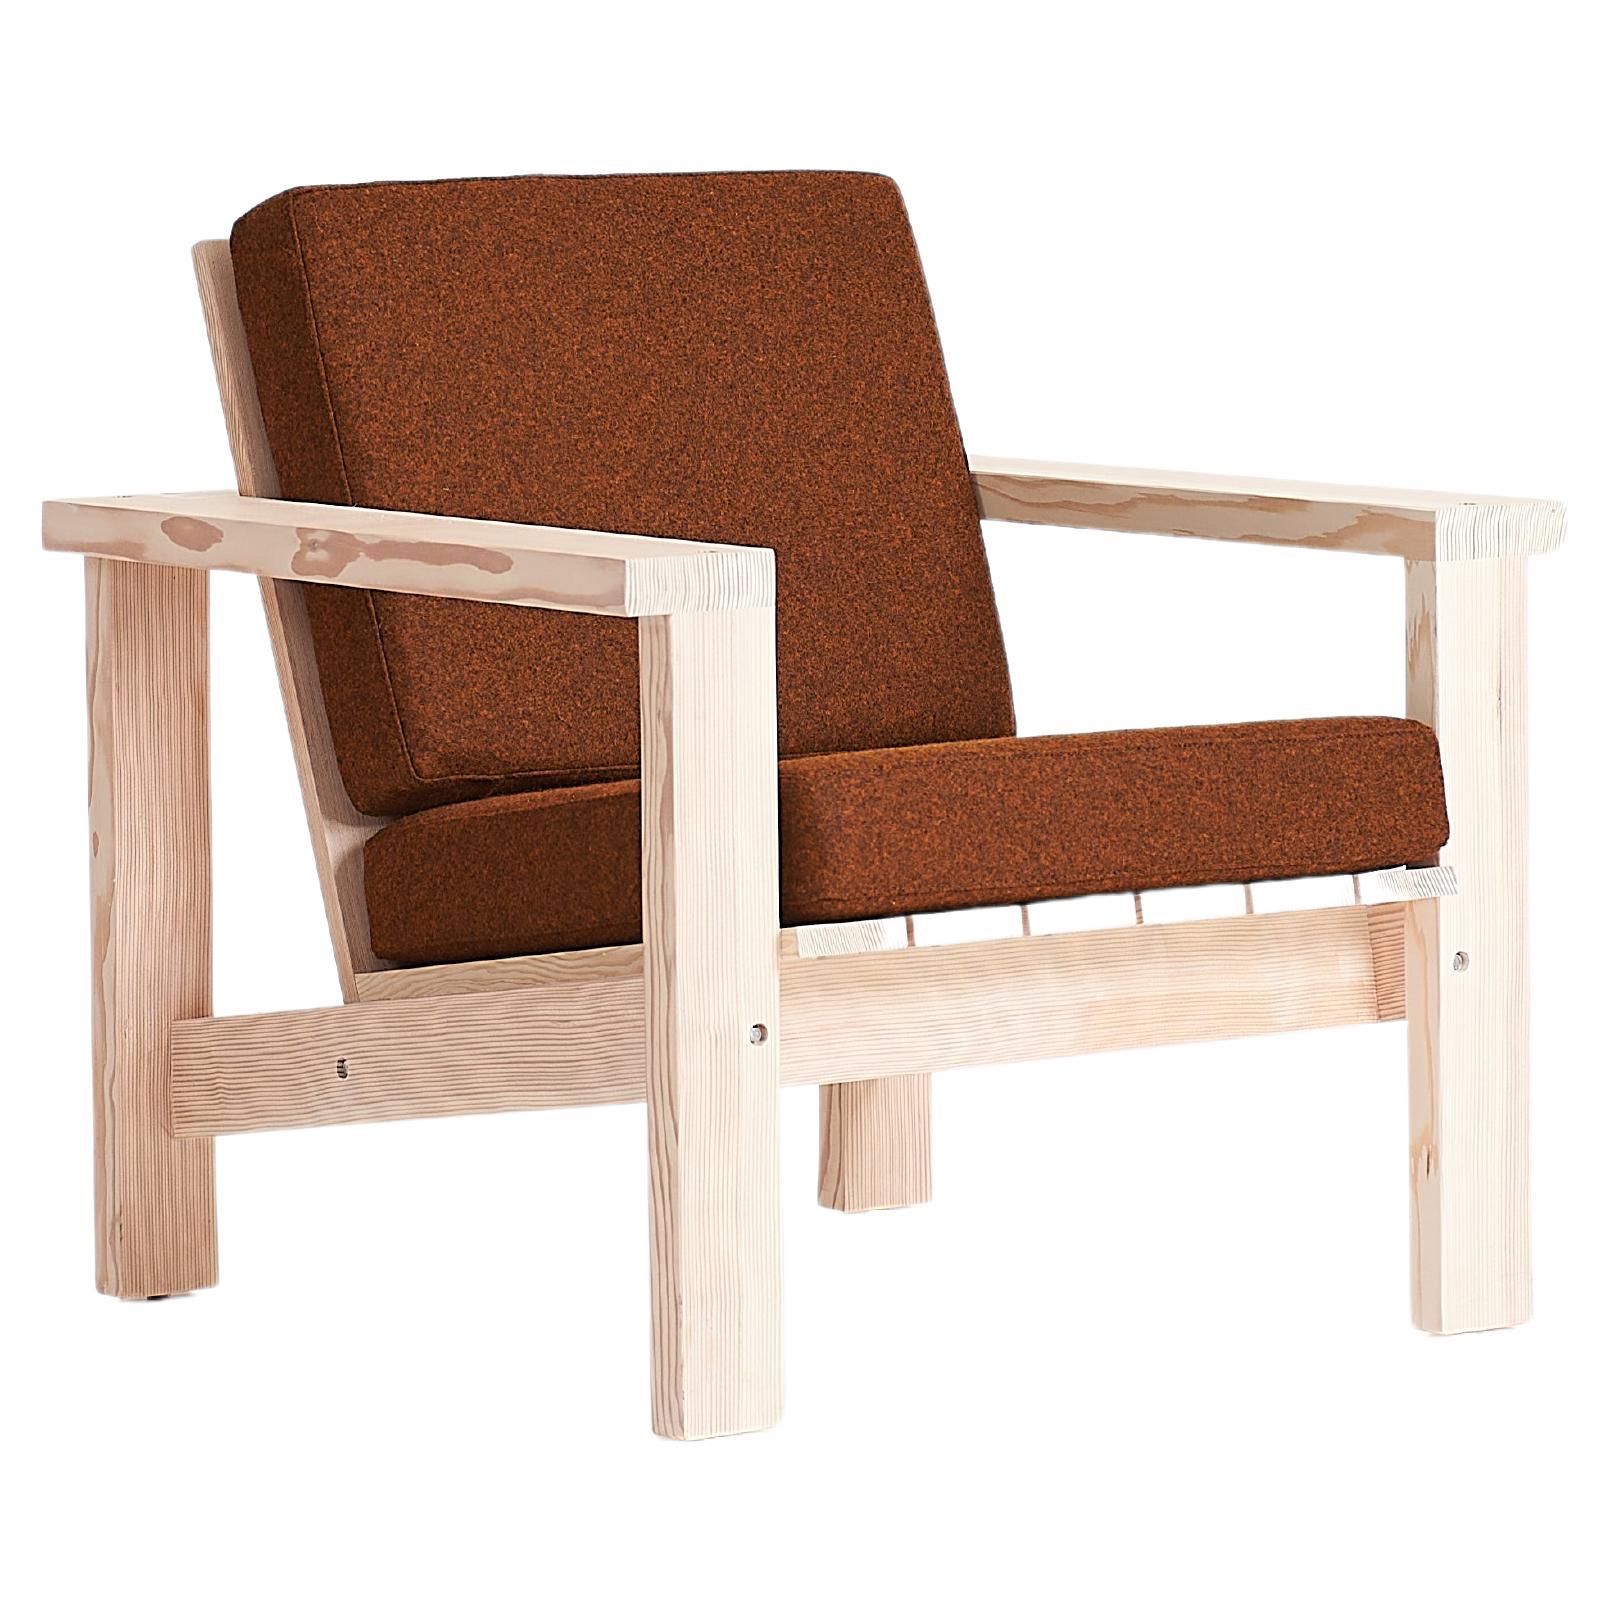 The Plank Lounge - Wooden Lounge Chair With Upholstered Seat Cushion